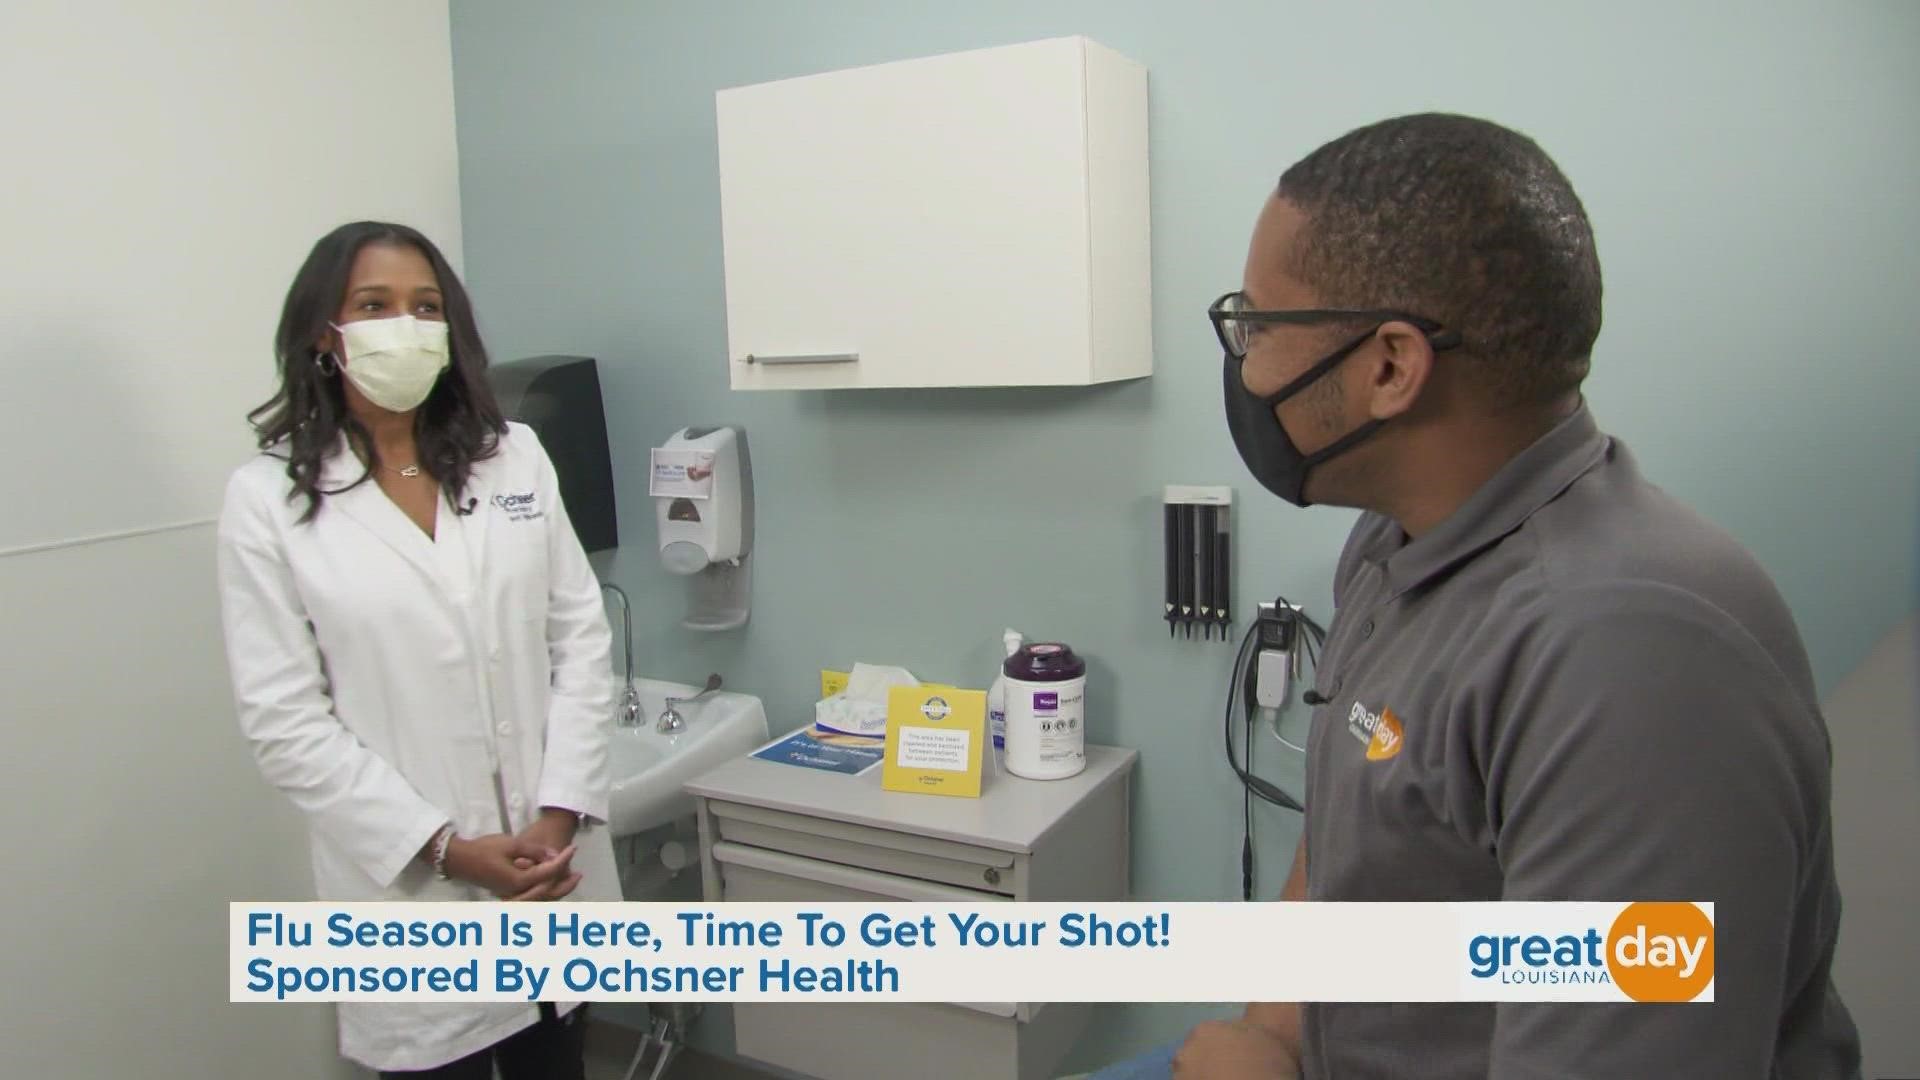 A Ochsner pharmacist shared details about the importance of flu shots. She also discussed Ochsner Anywhere Care. Visit Ochsner.org/flu to set up an appointment.